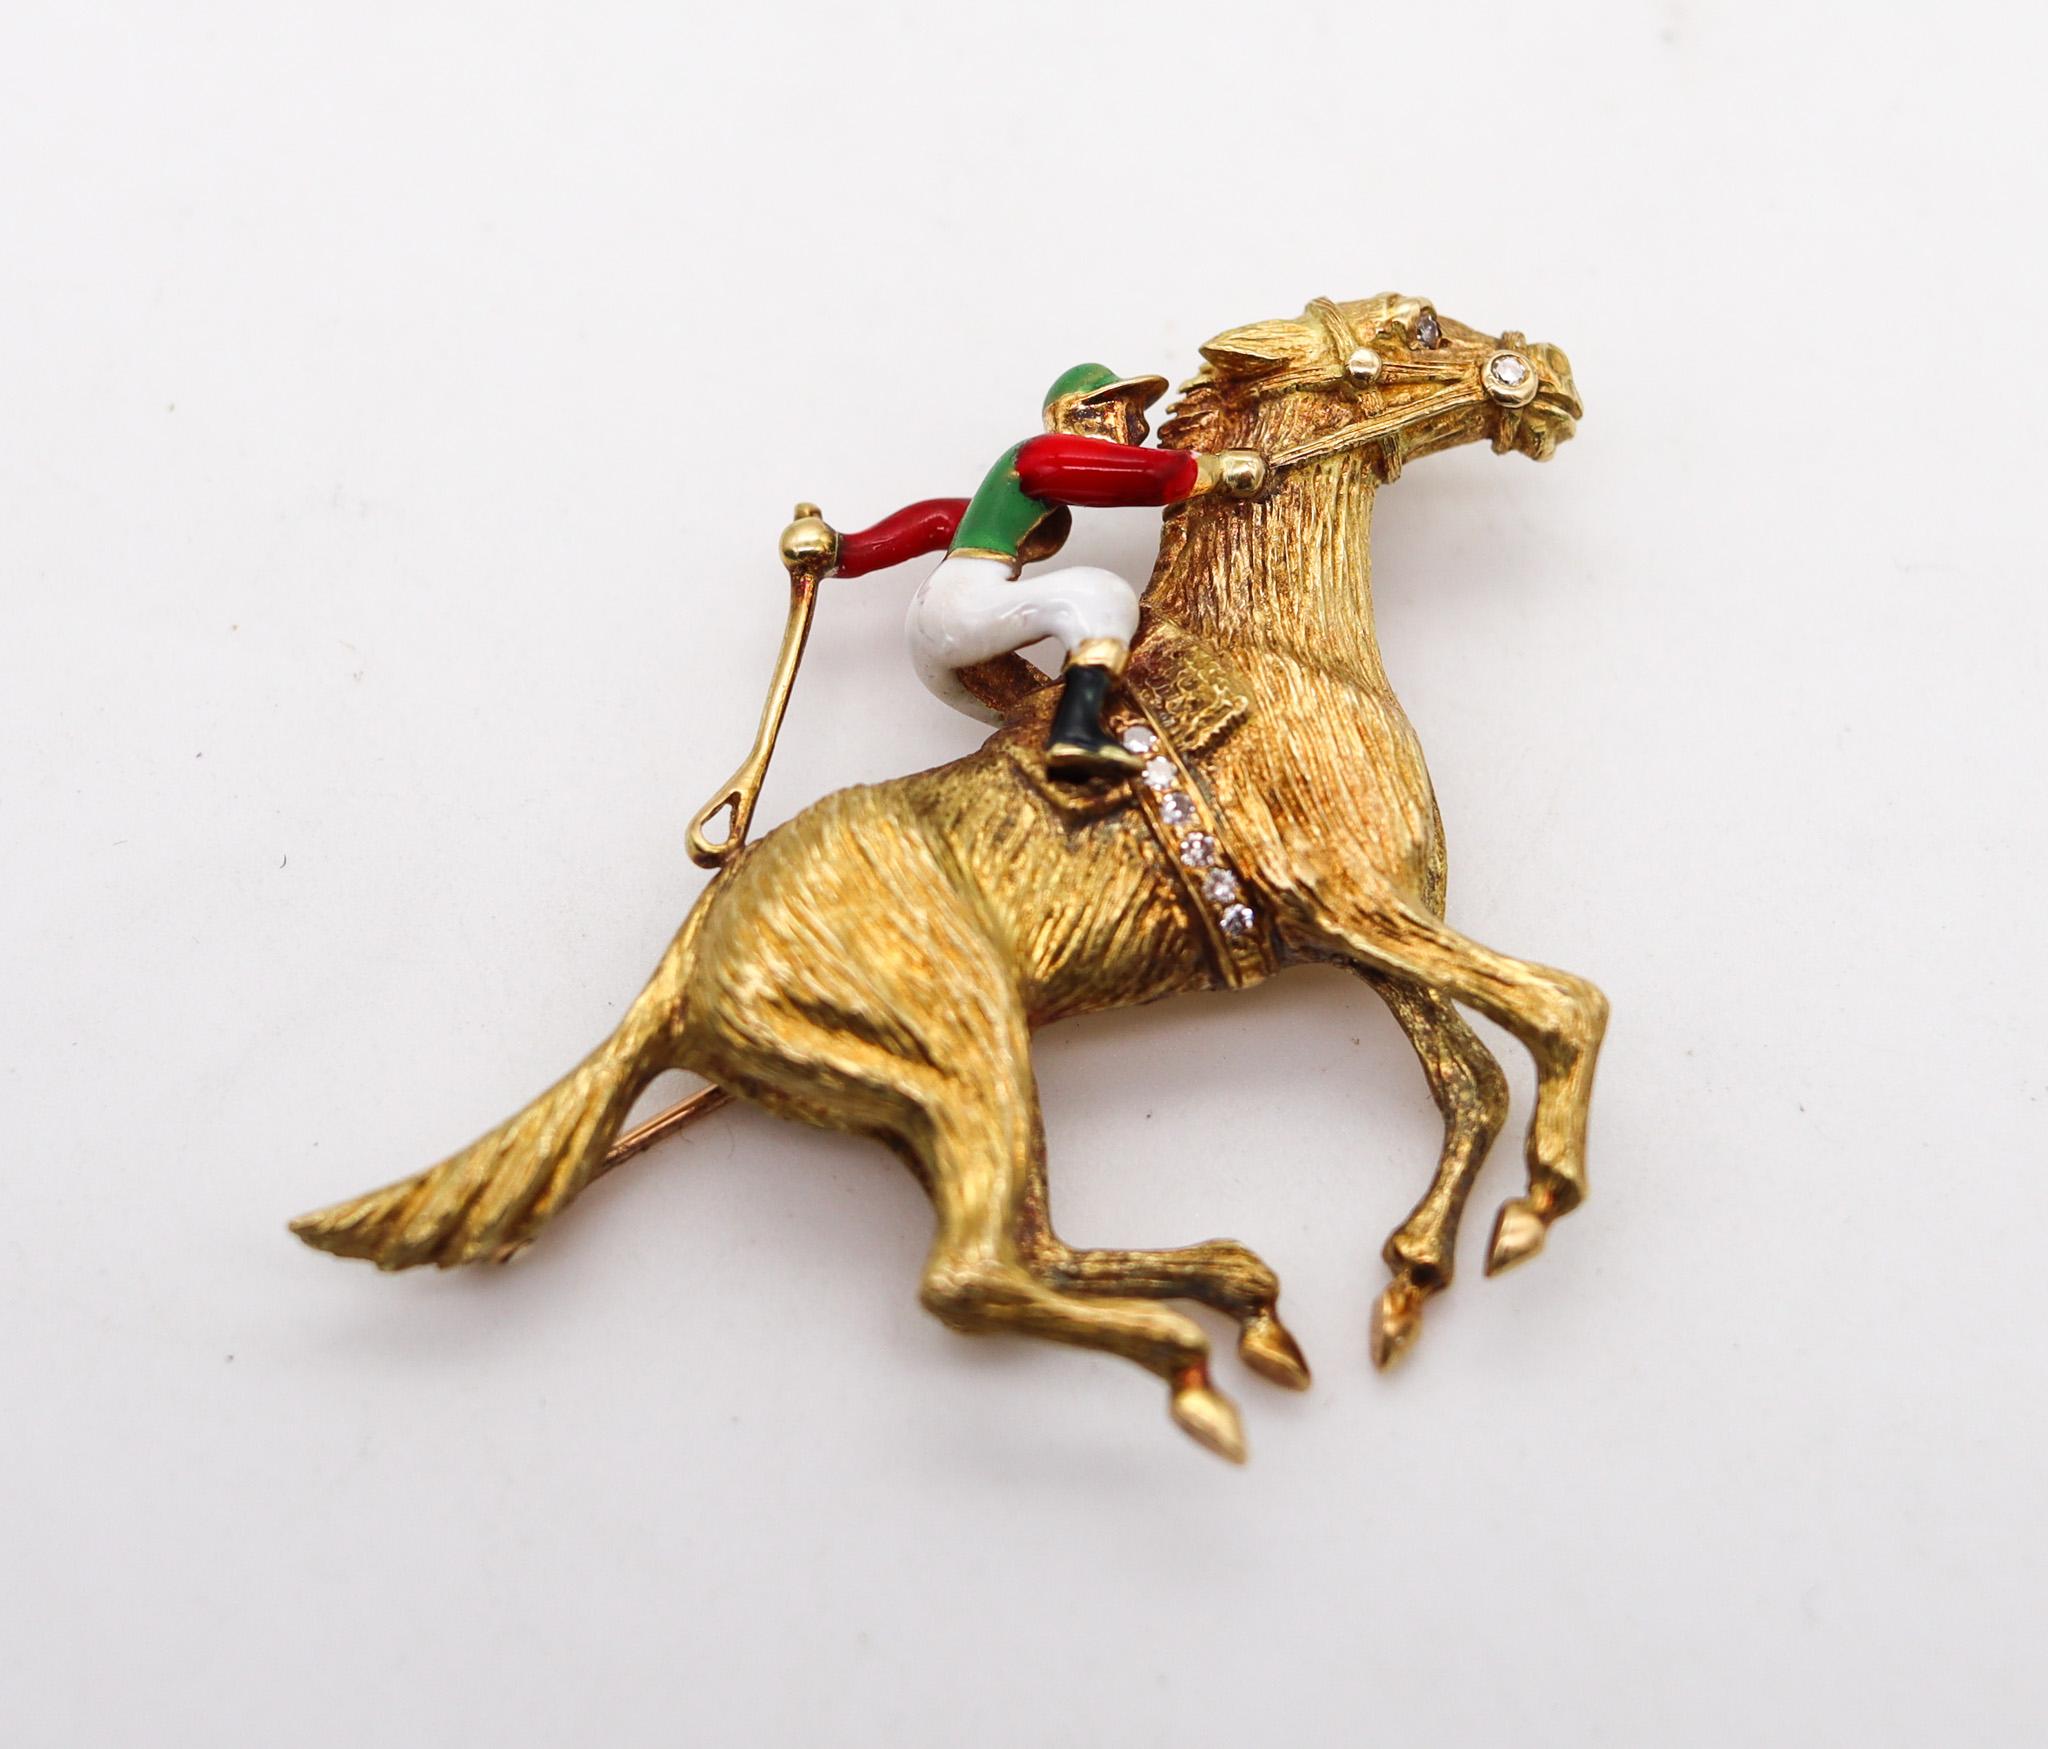 Racing horse Jockey brooch designed by Cartier.

A very rare beautiful piece, created by the jewelry house of Cartier, back in the 1950. This colorful racing horse jockey brooch has been carefully crafted in solid yellow gold of 18 karats and fitted